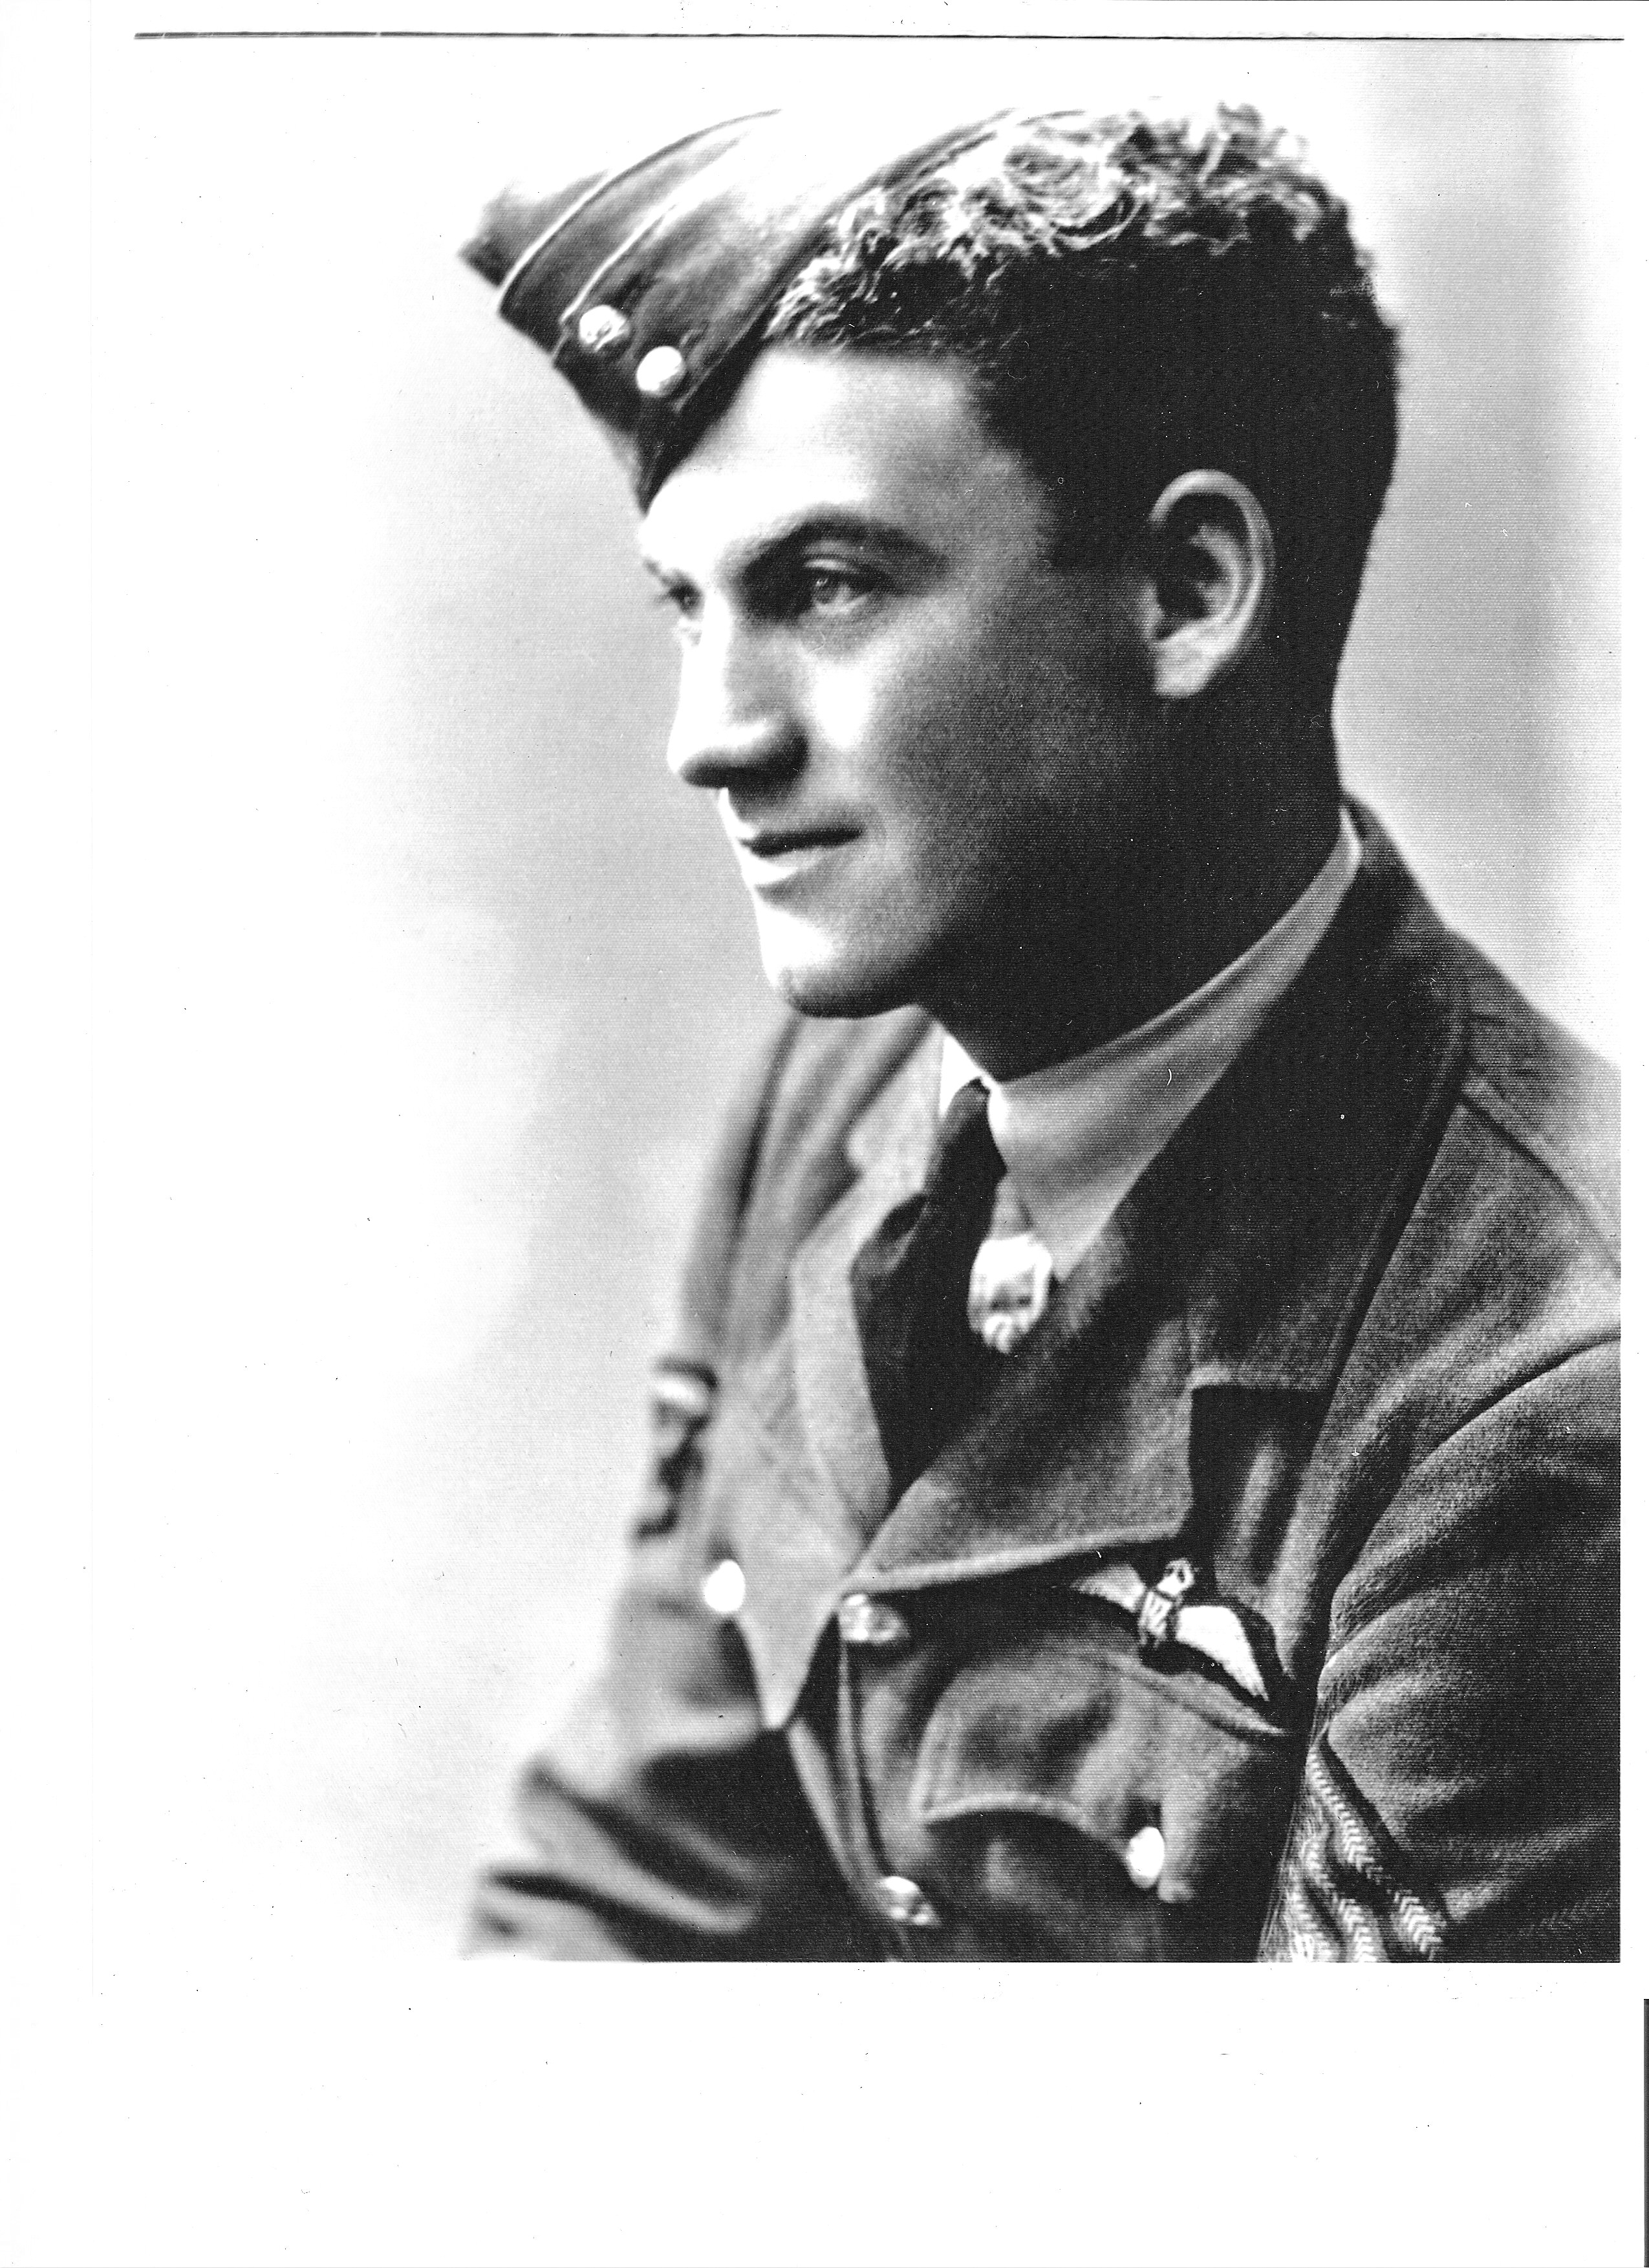 Sergeant Aynsley S Forbes, 1940